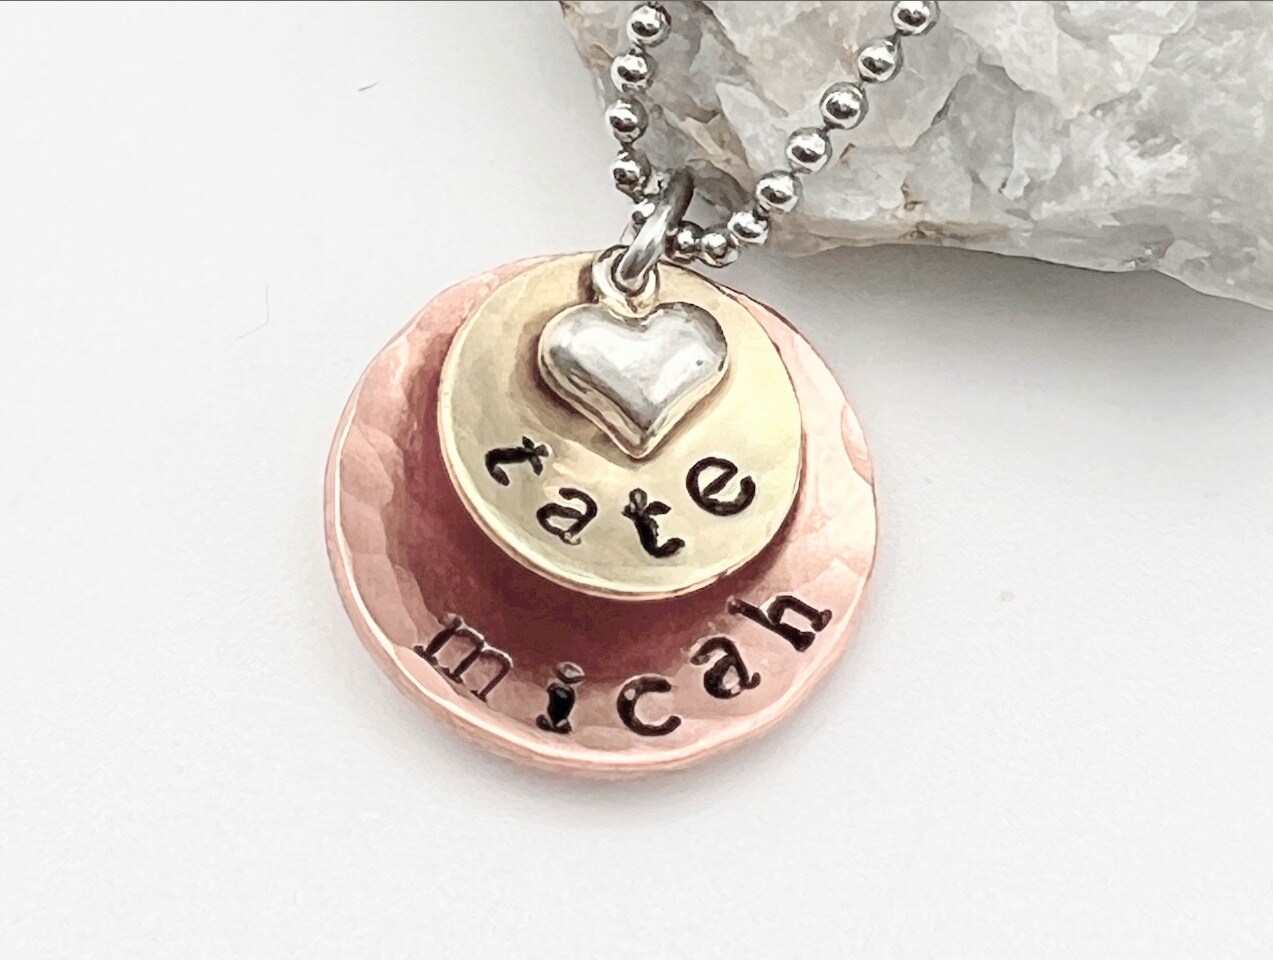 Personalized Jewelry, Mixed Metal Layered Discs Necklace, Kids Name Necklace, Personalized Necklace, Gift For Mom, Mothers Day Jewelry Gift